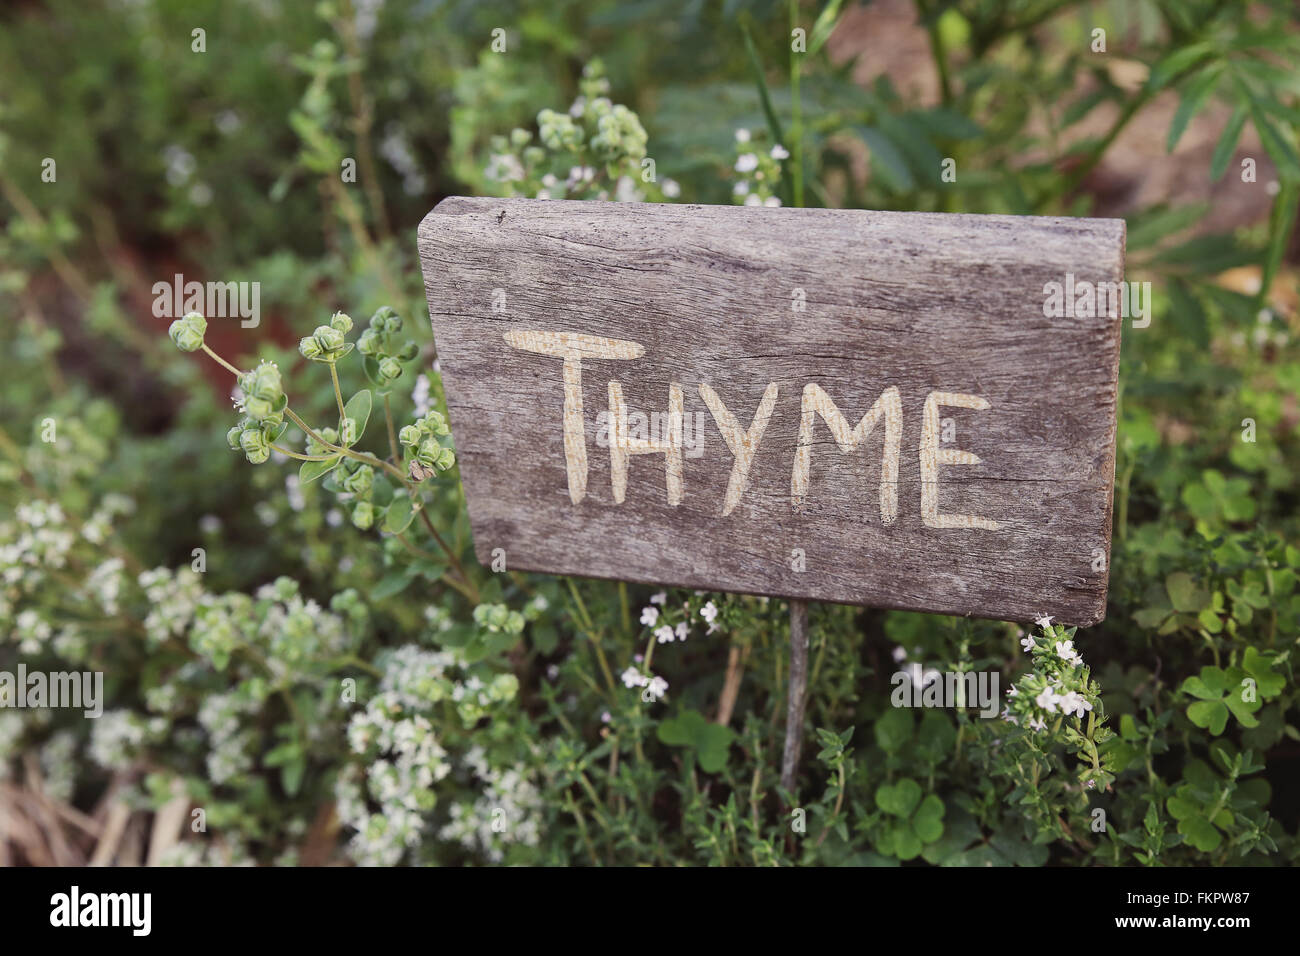 Rustic Herb markers, Thyme, vintage filter Stock Photo